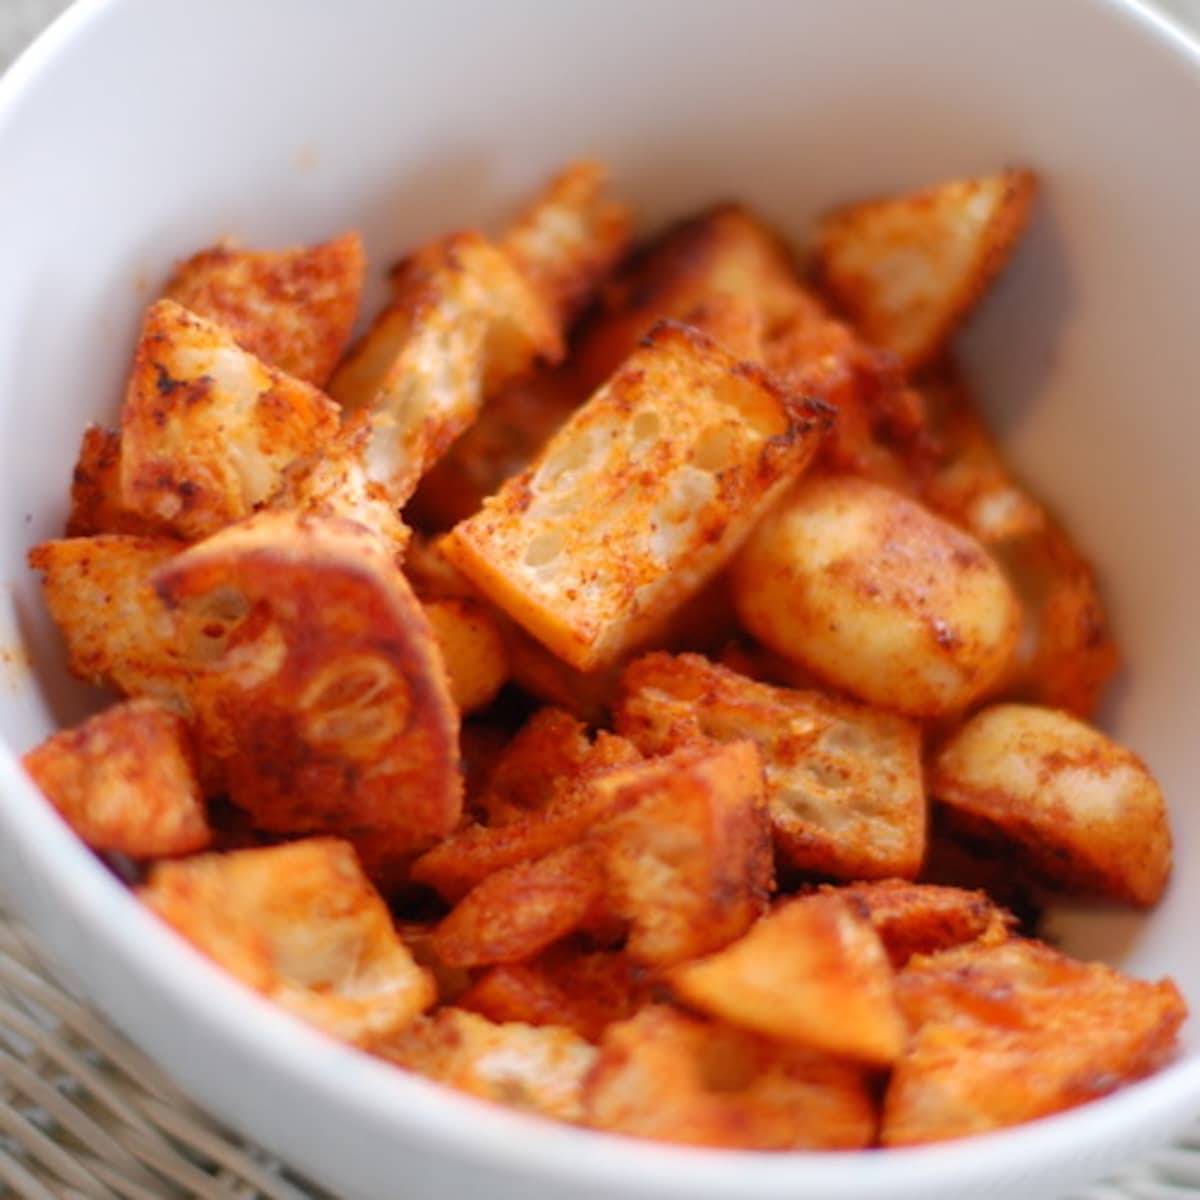 Smoky paprika croutons in a white bowl.